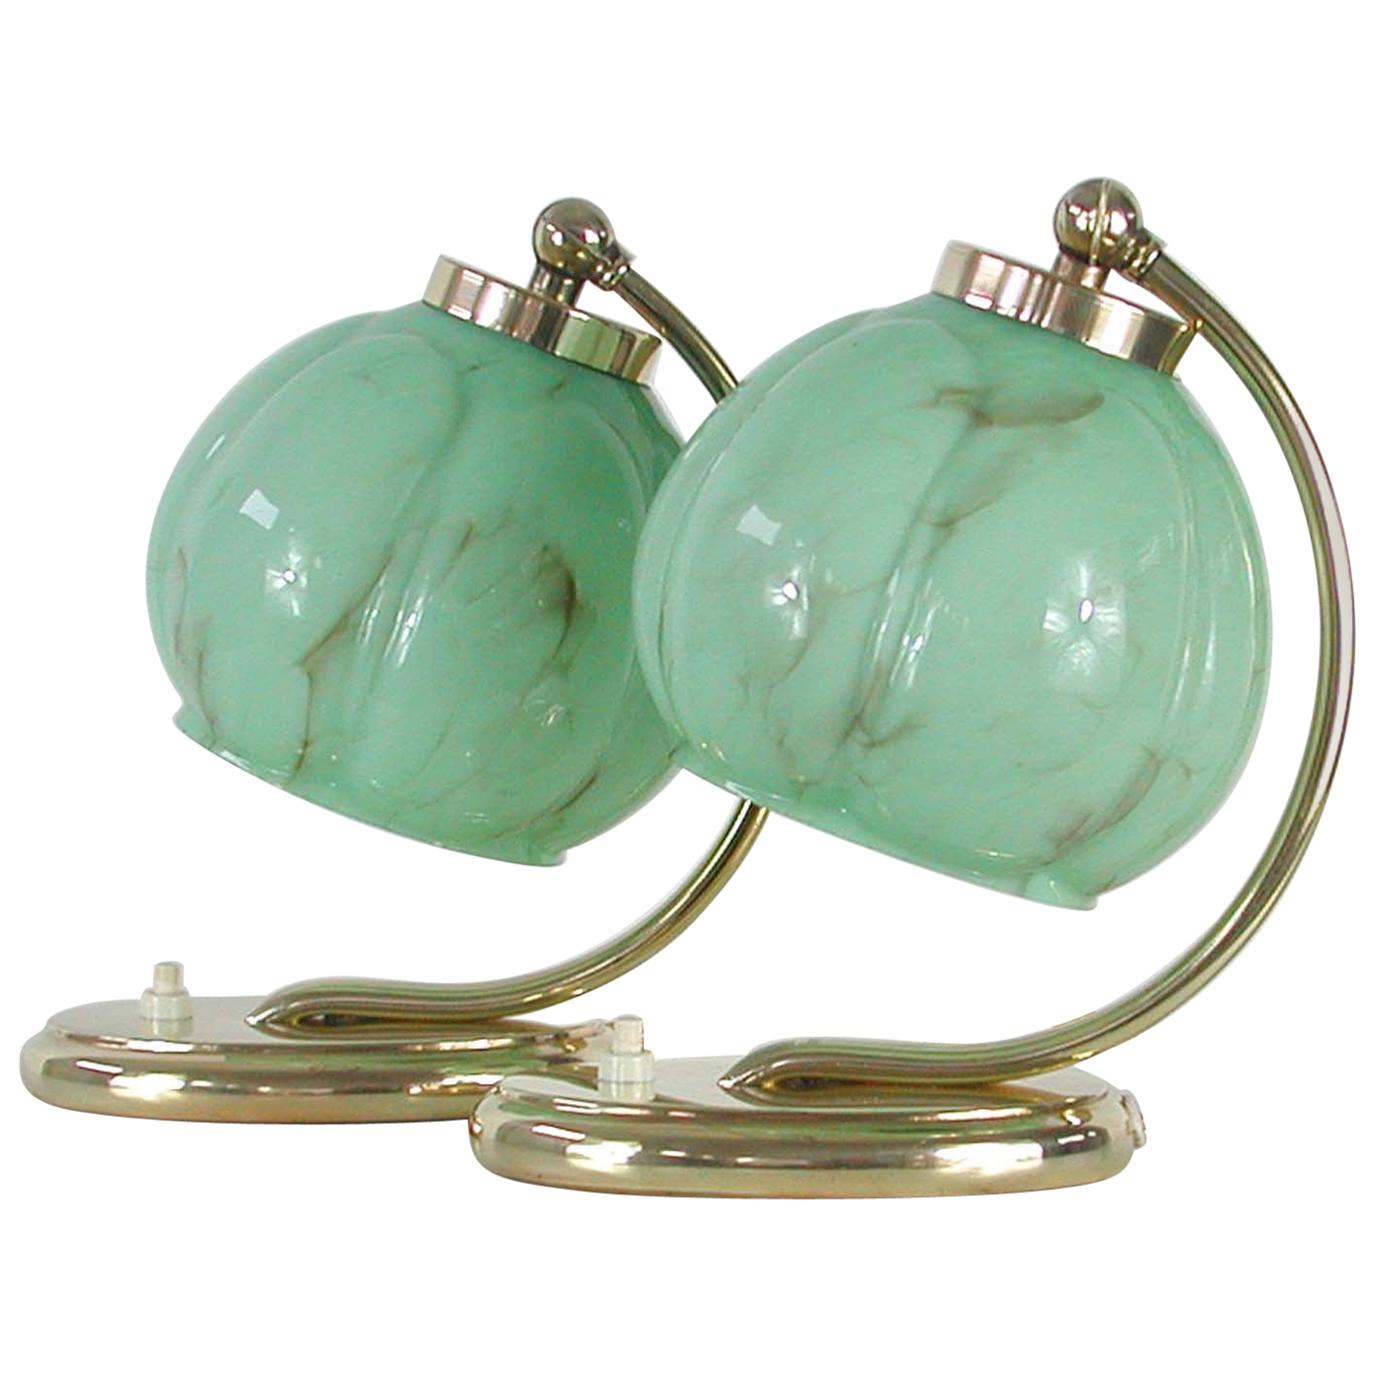 German Bauhaus Brass Table Lamps Marbled Opal Shades, Set of 2, 1930s